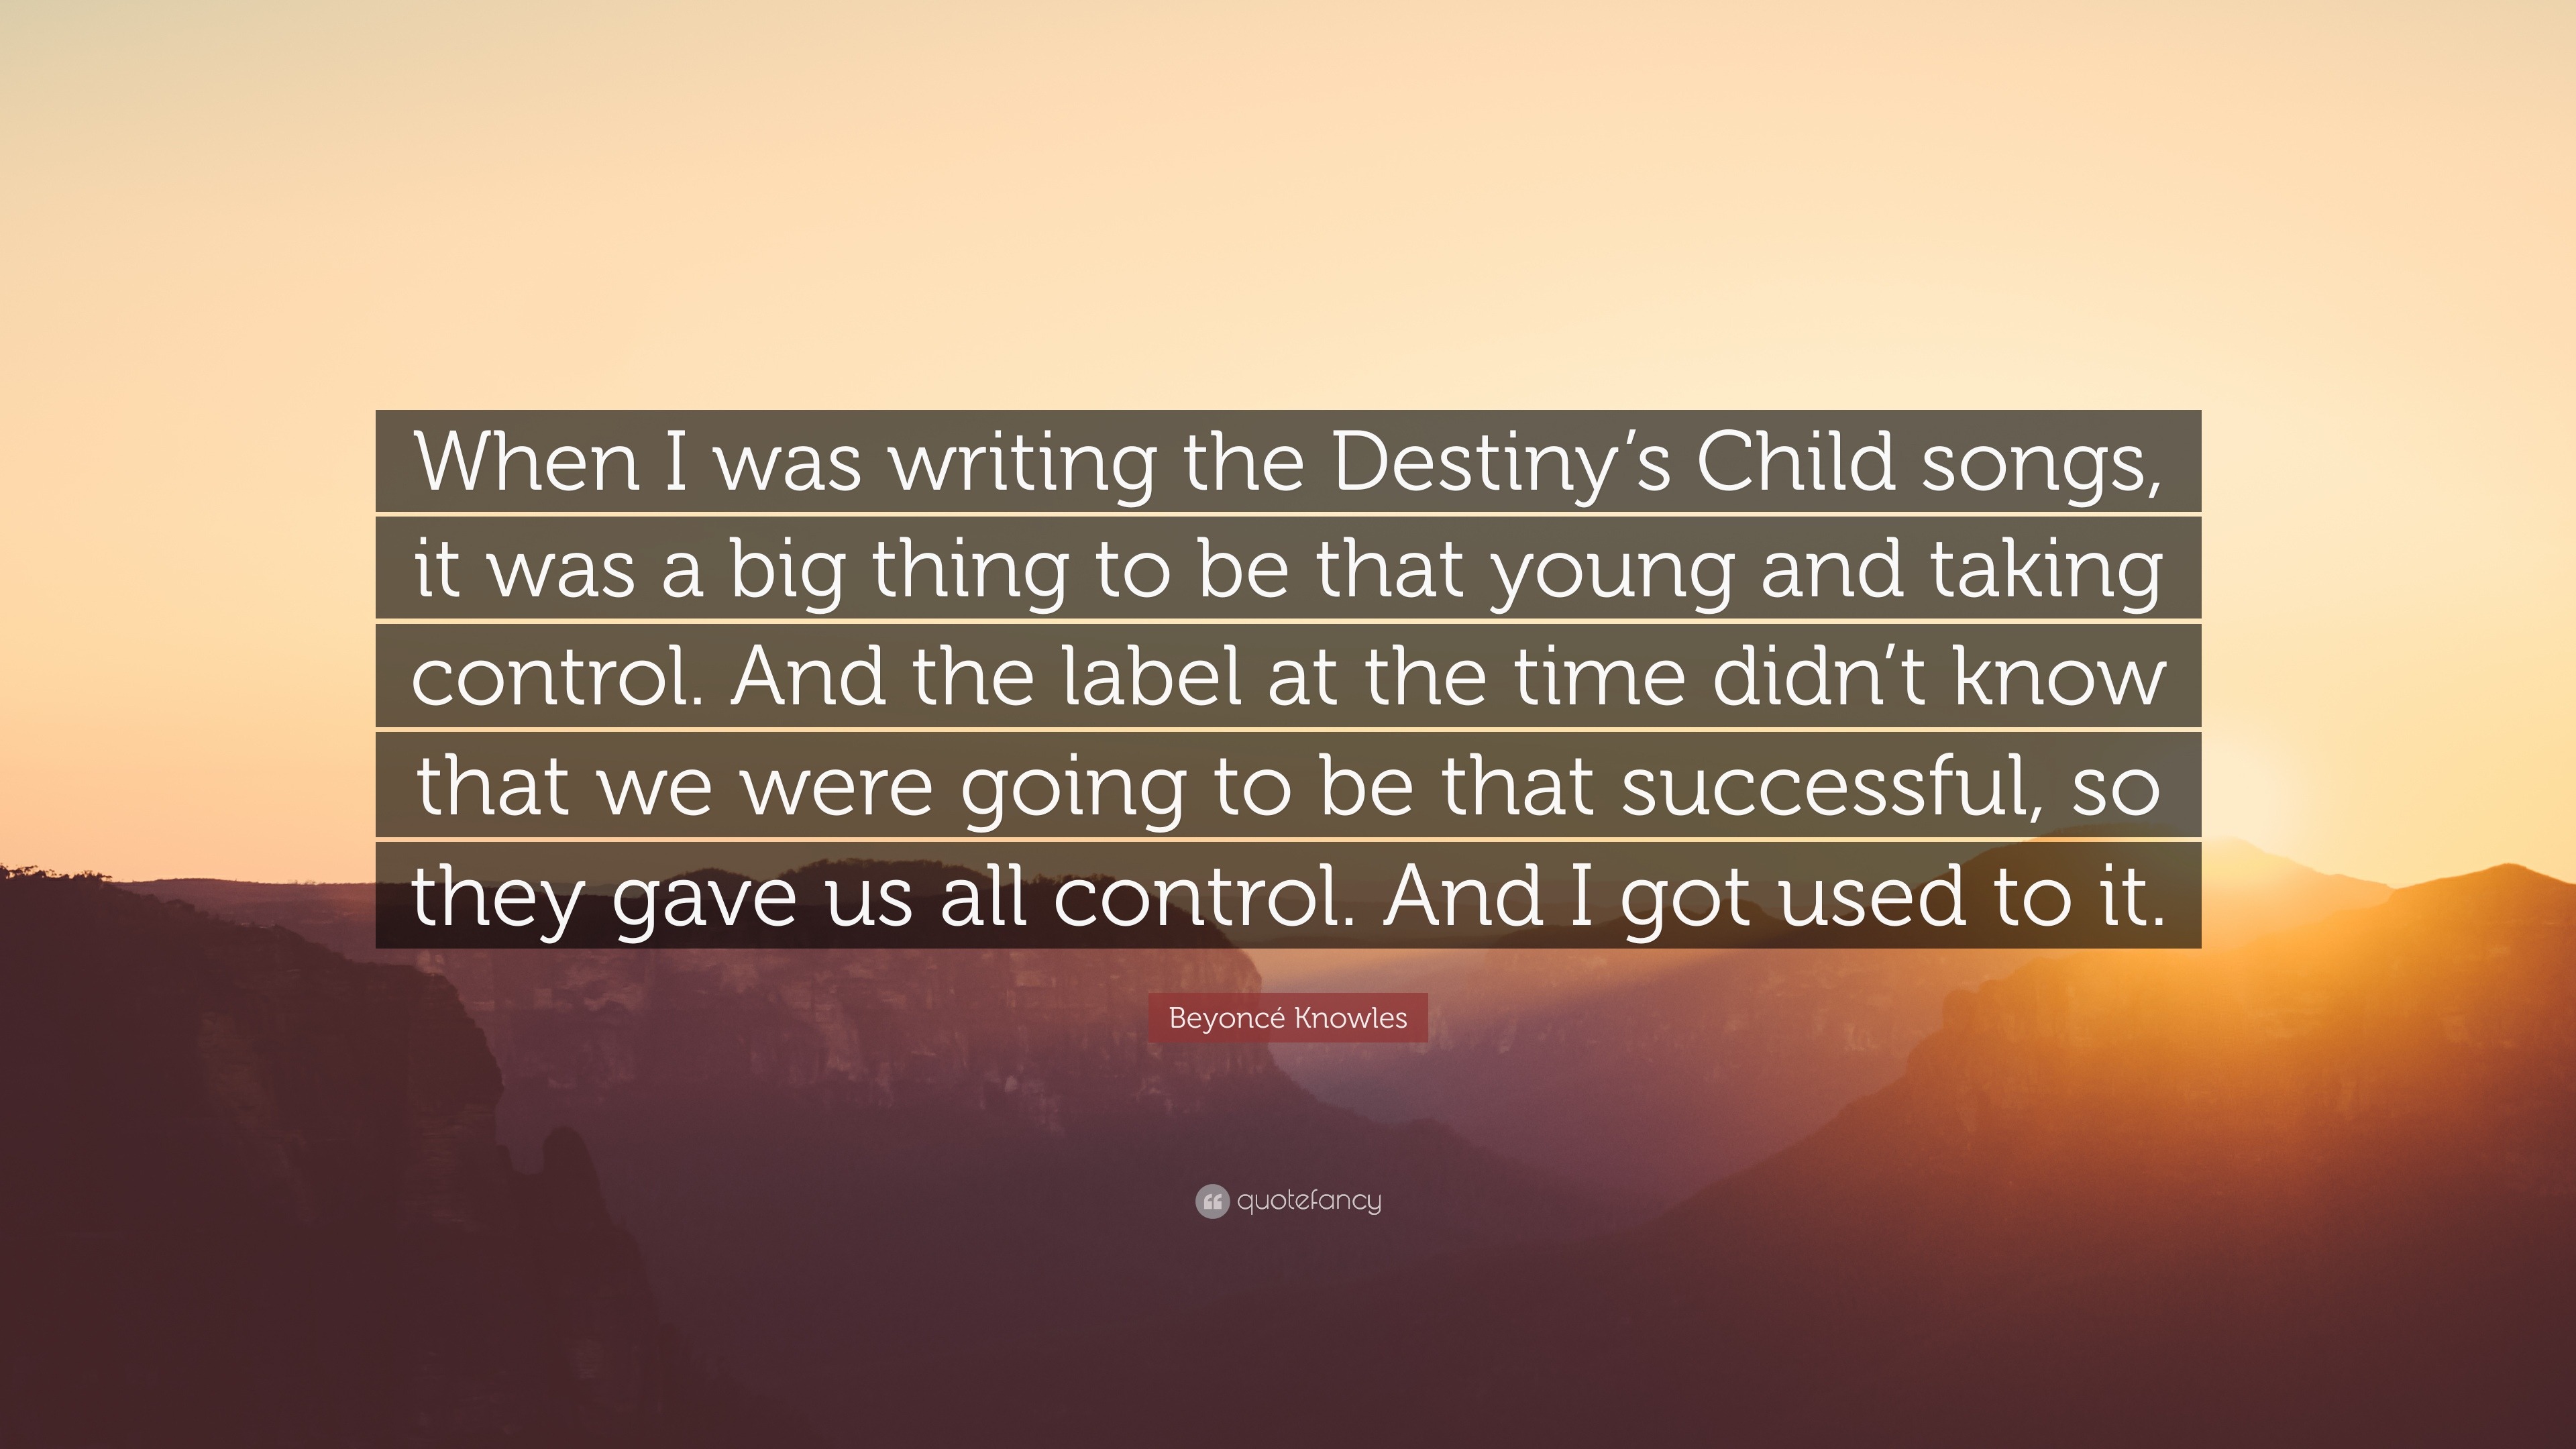 Beyonce Knowles quote: The lyrics to the single 'Survivor' are Destiny's  Child's story